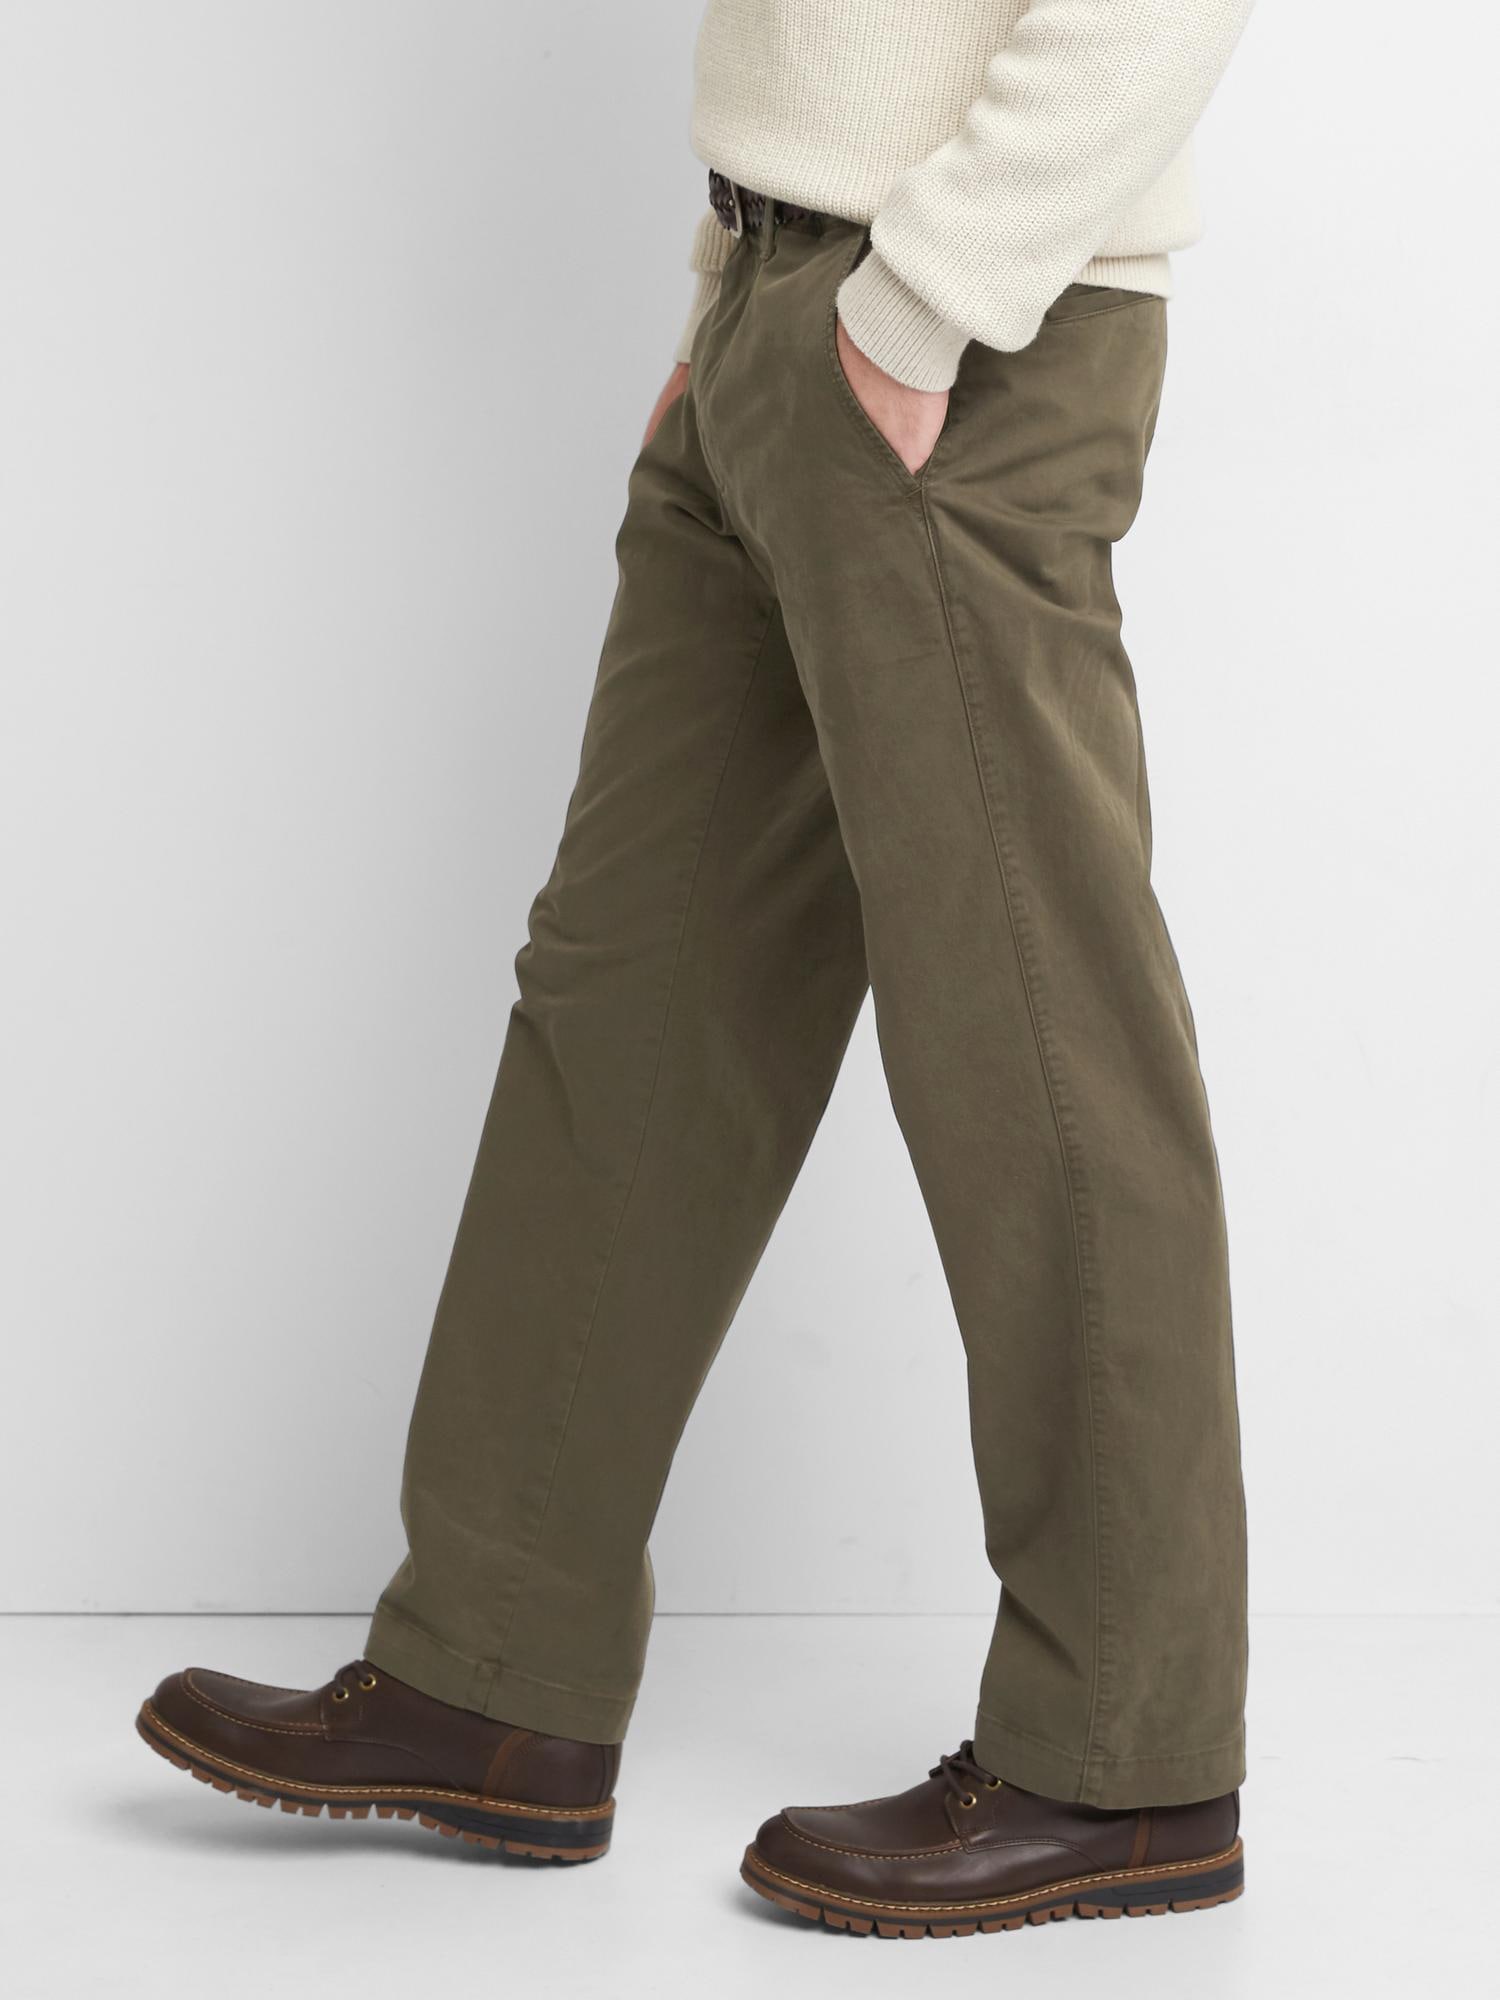 Vintage Khakis In Relaxed Fit With Gapflex Gap